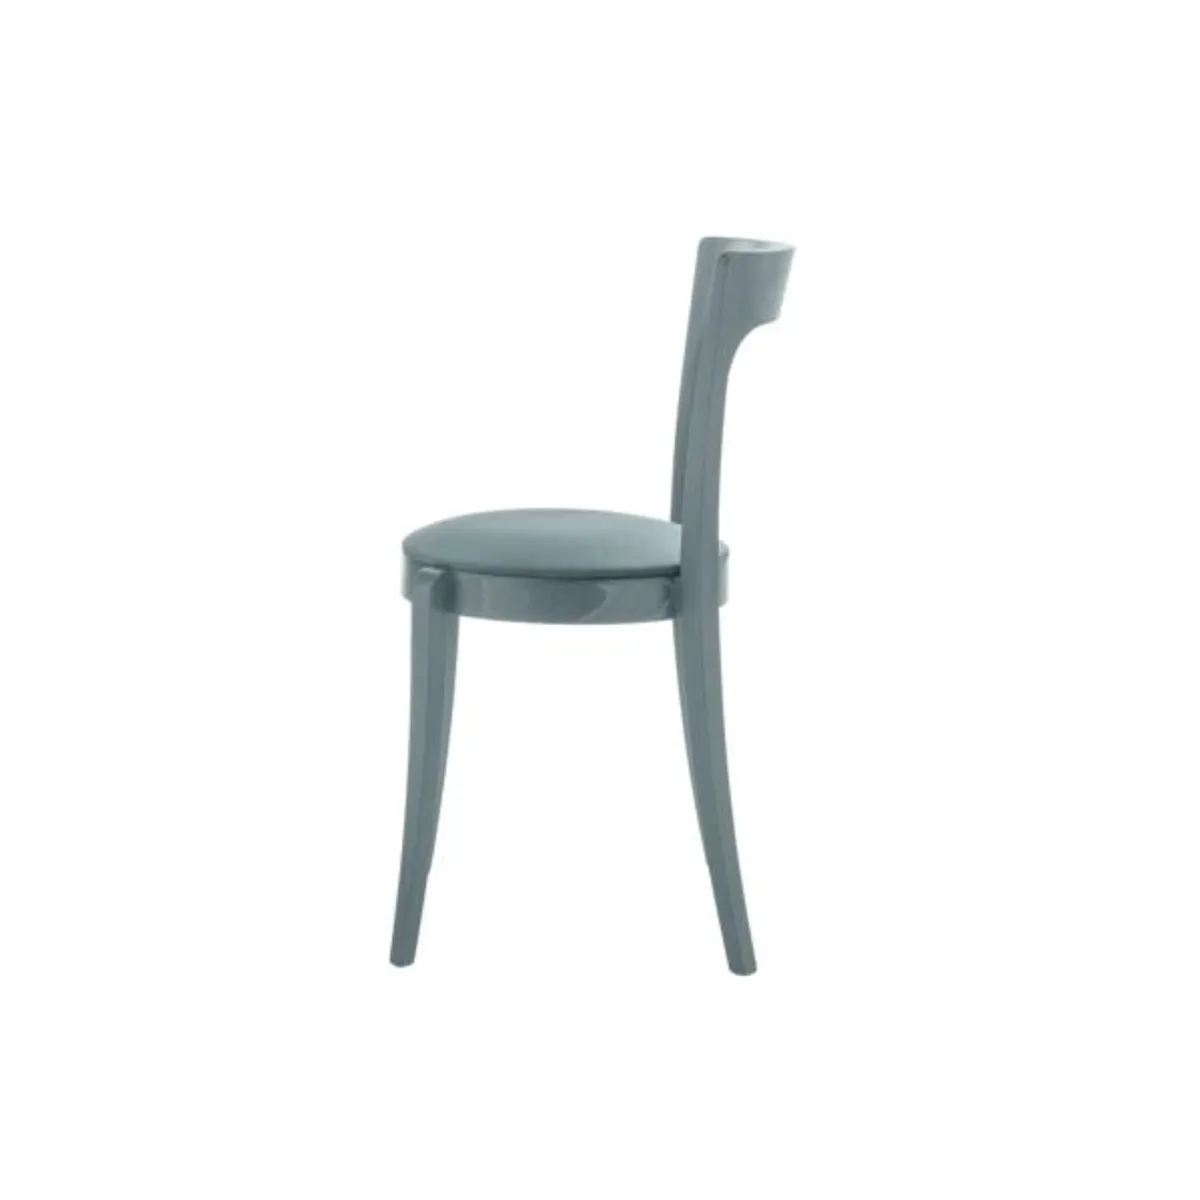 Elodie soft side chair 3